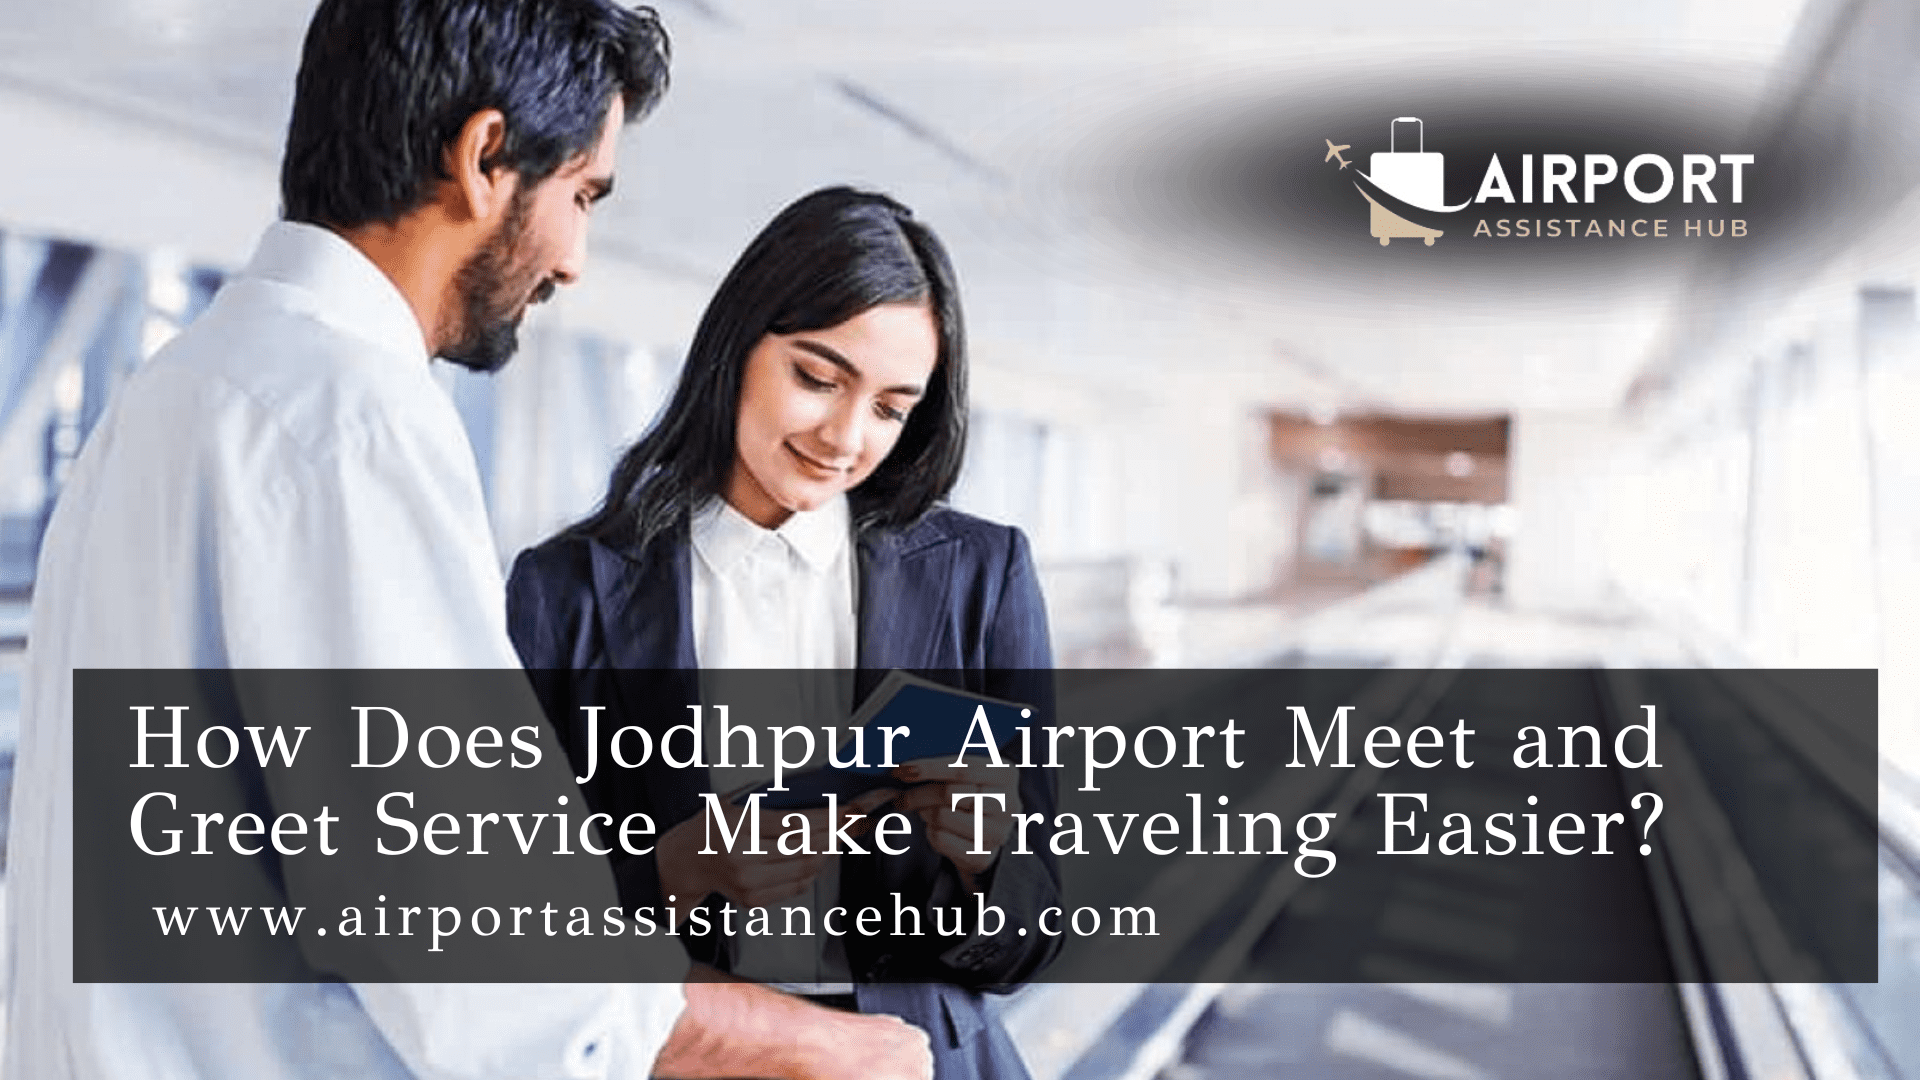 How Does Jodhpur Airport Meet and Greet Service Make Traveling Easier?